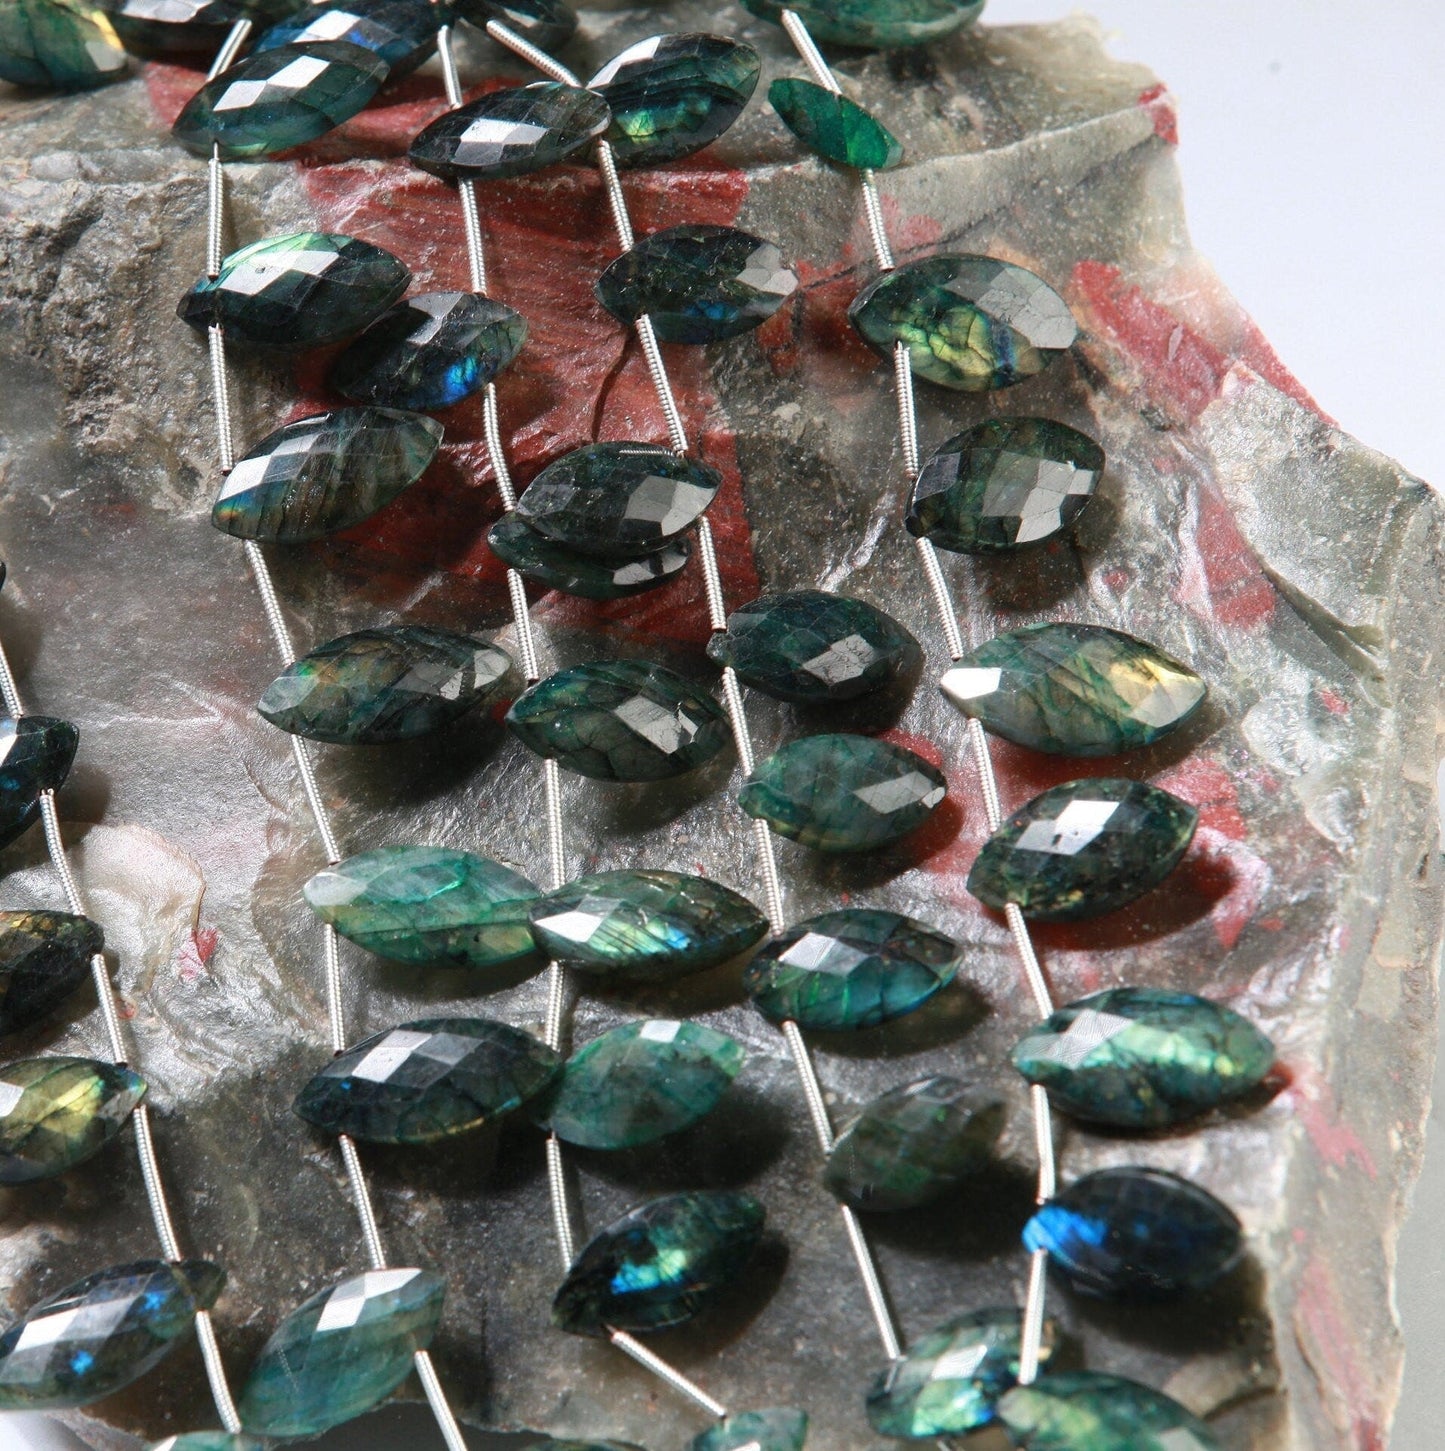 Natural Labradorite Faceted Marquise Drop Beads Blue Green Flashy 8x15-17mm Gemstone 10 pcs ,Jewelry Making Beads